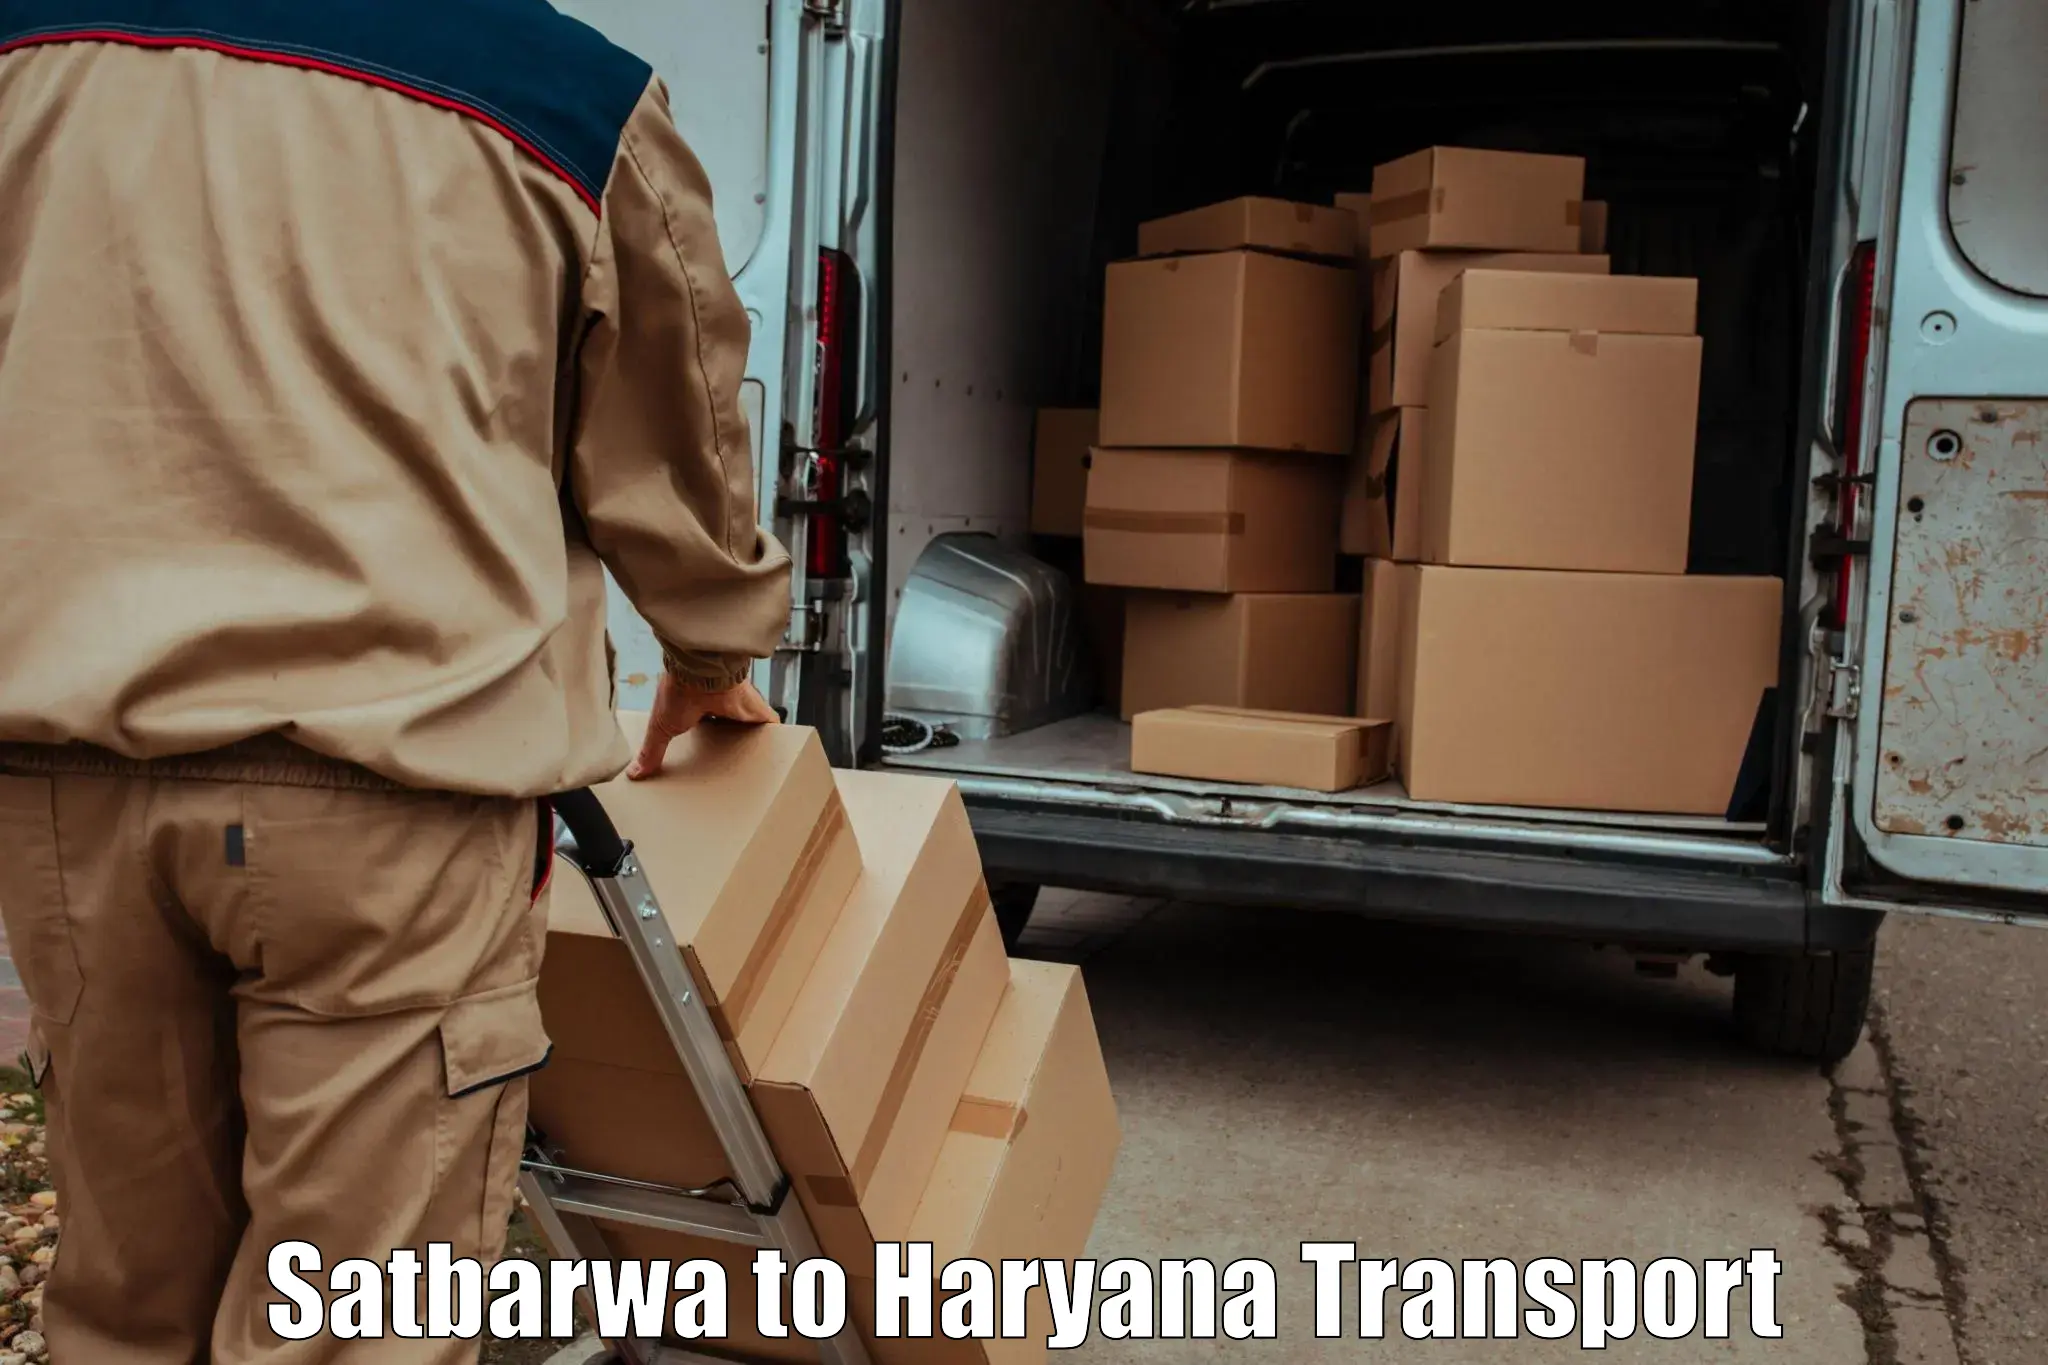 Daily parcel service transport in Satbarwa to Ambala